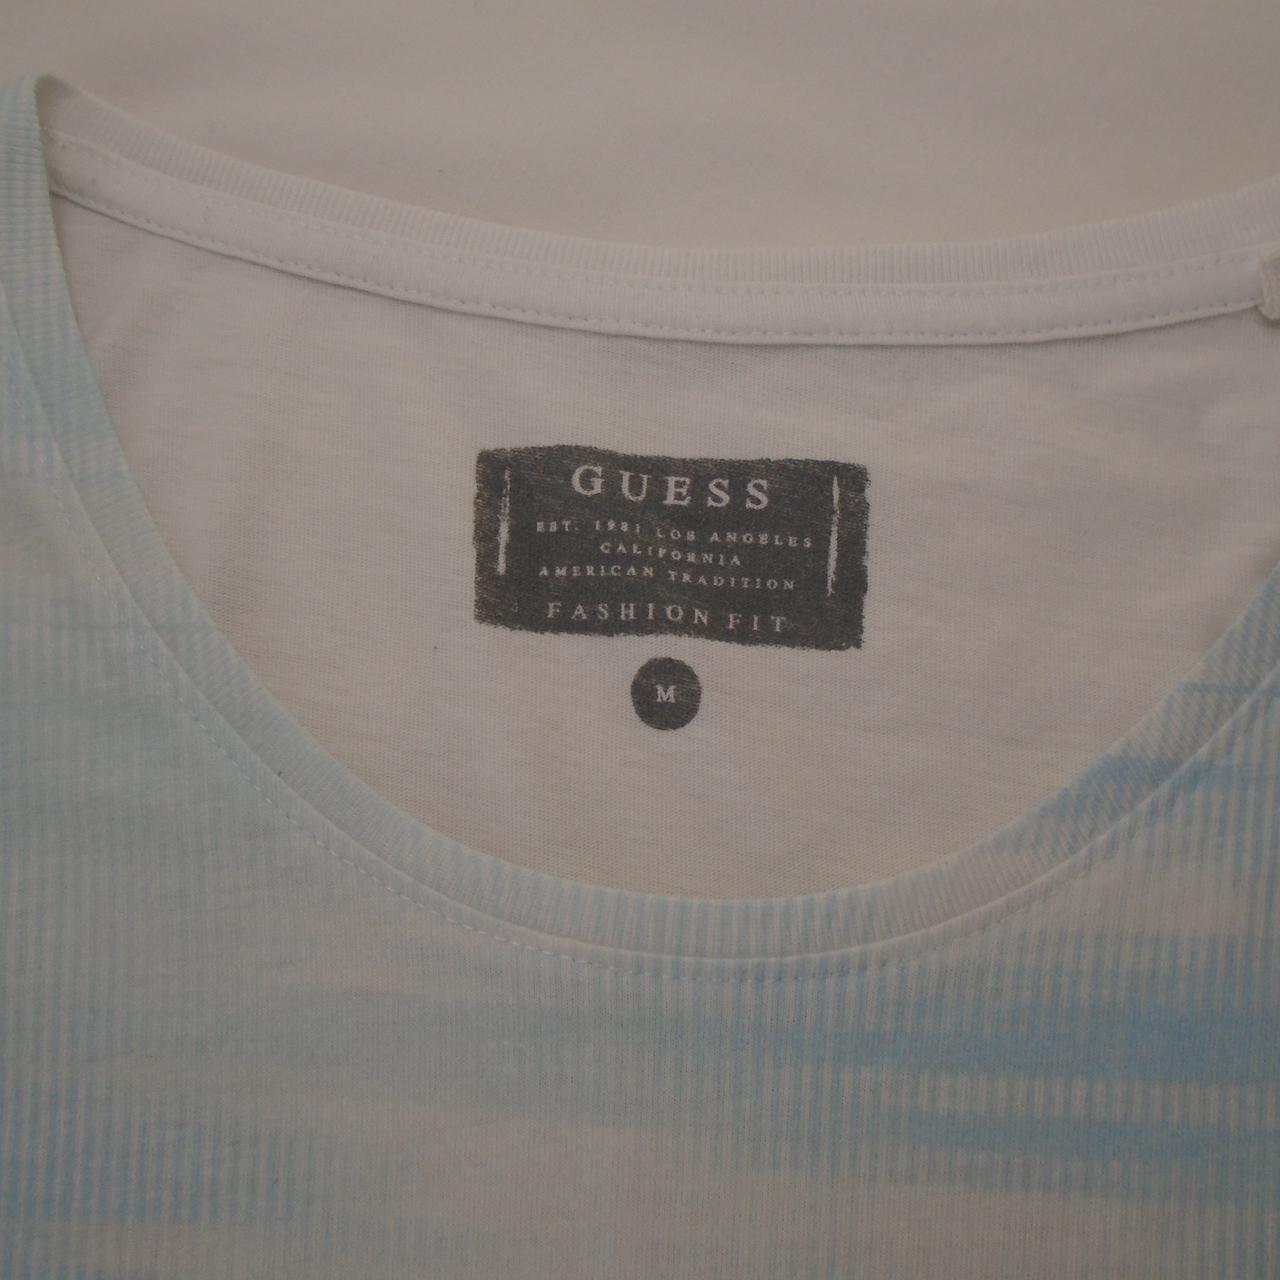 Men's T-Shirt GUESS. Multicolor. M. Used. Good